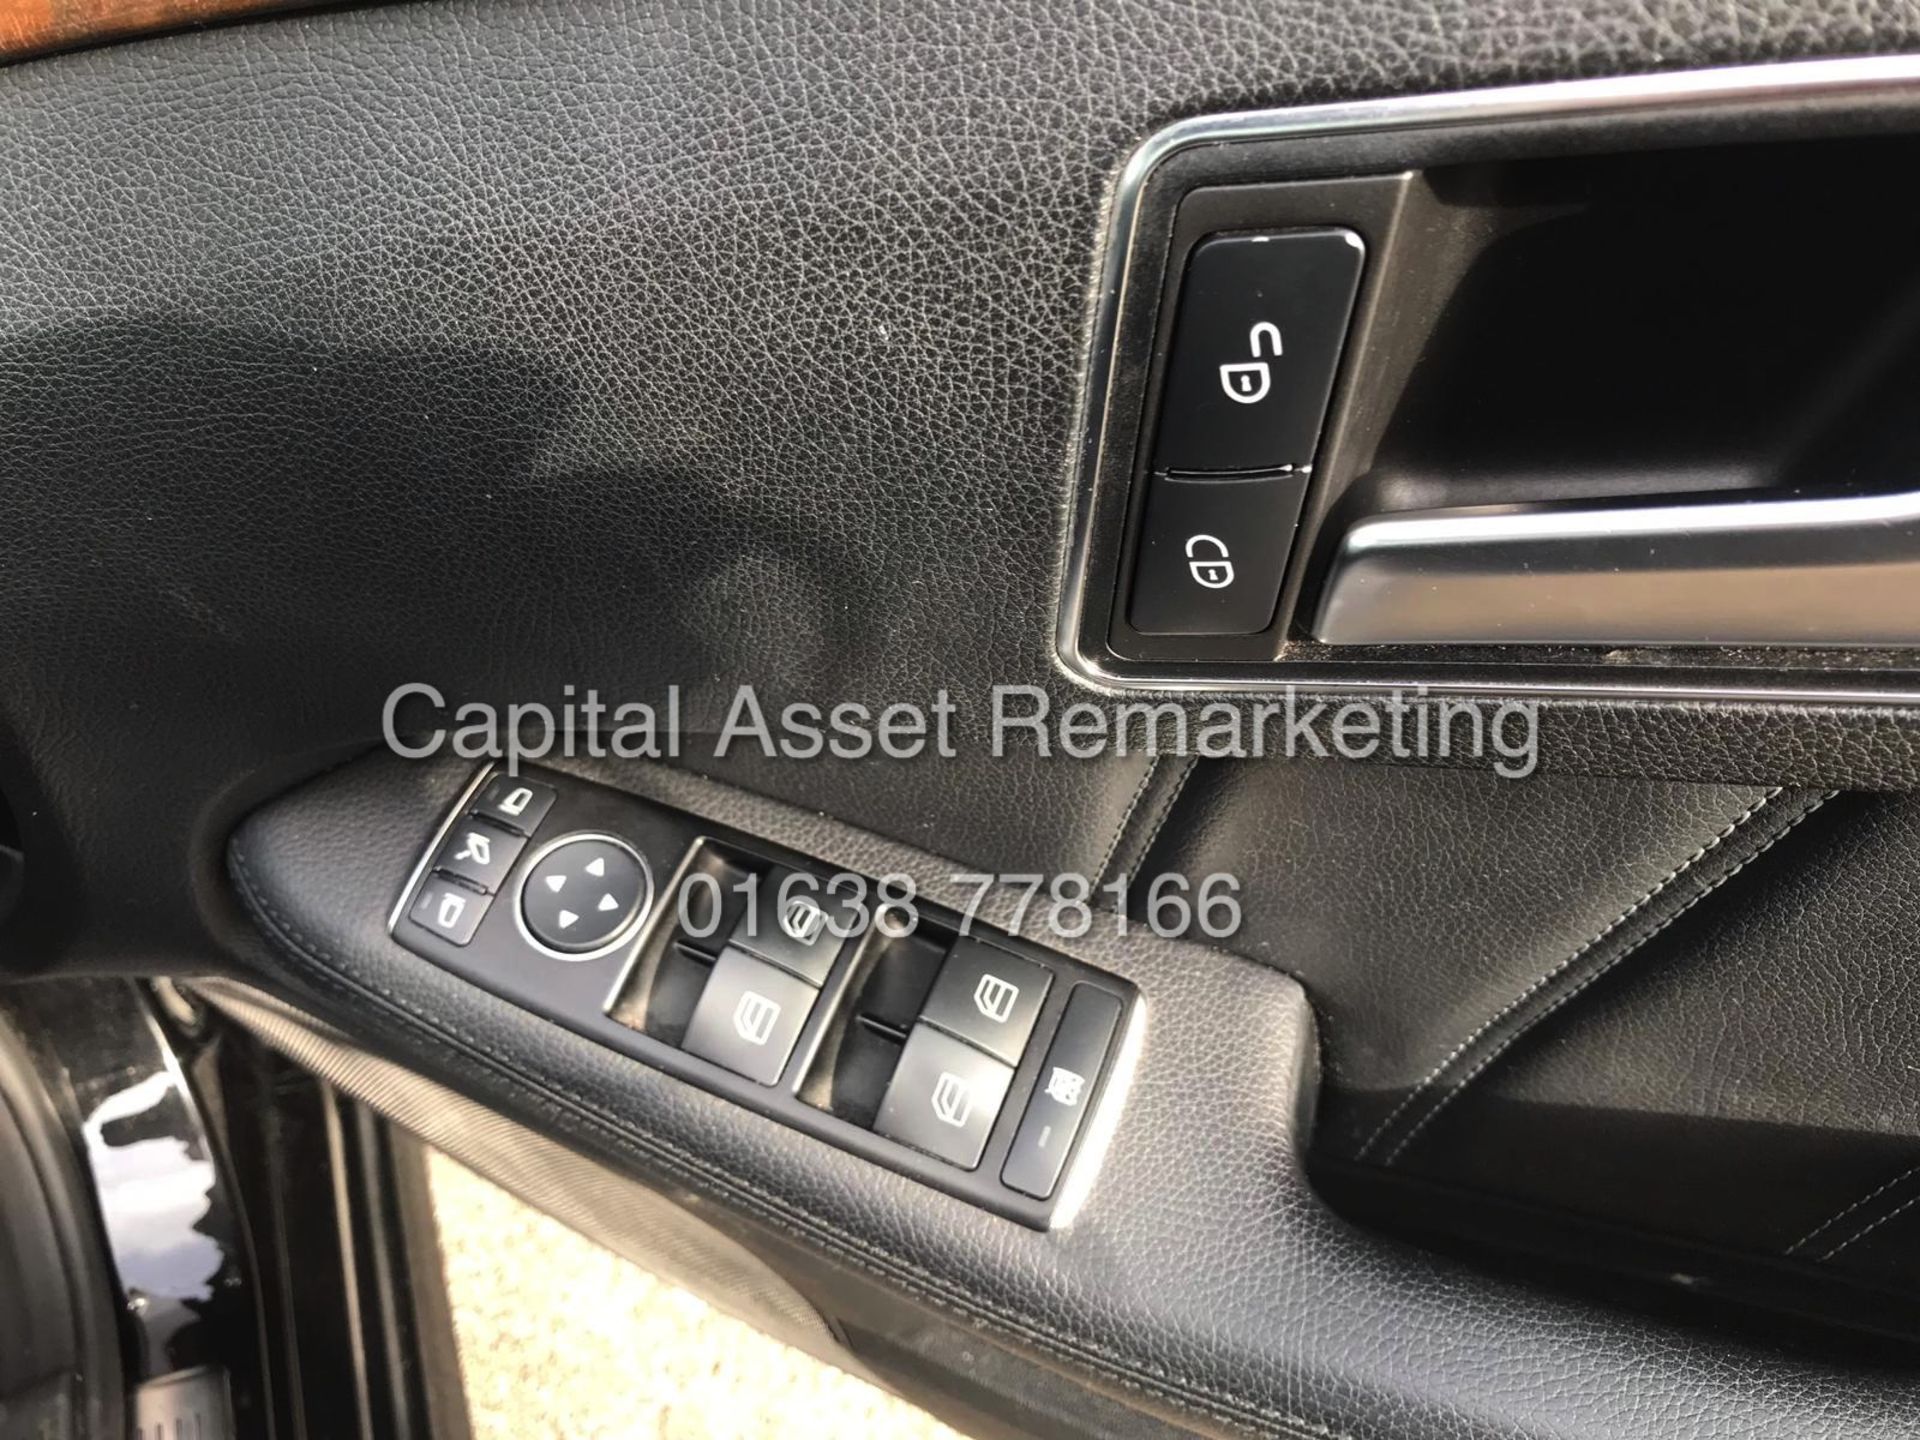 MERCEDES E220d "SPECIAL EQUIPMENT" 7G TRONIC (13 REG - NEW SHAPE) COMAND SAT NAV - LEATHER *LOOK* - Image 12 of 13